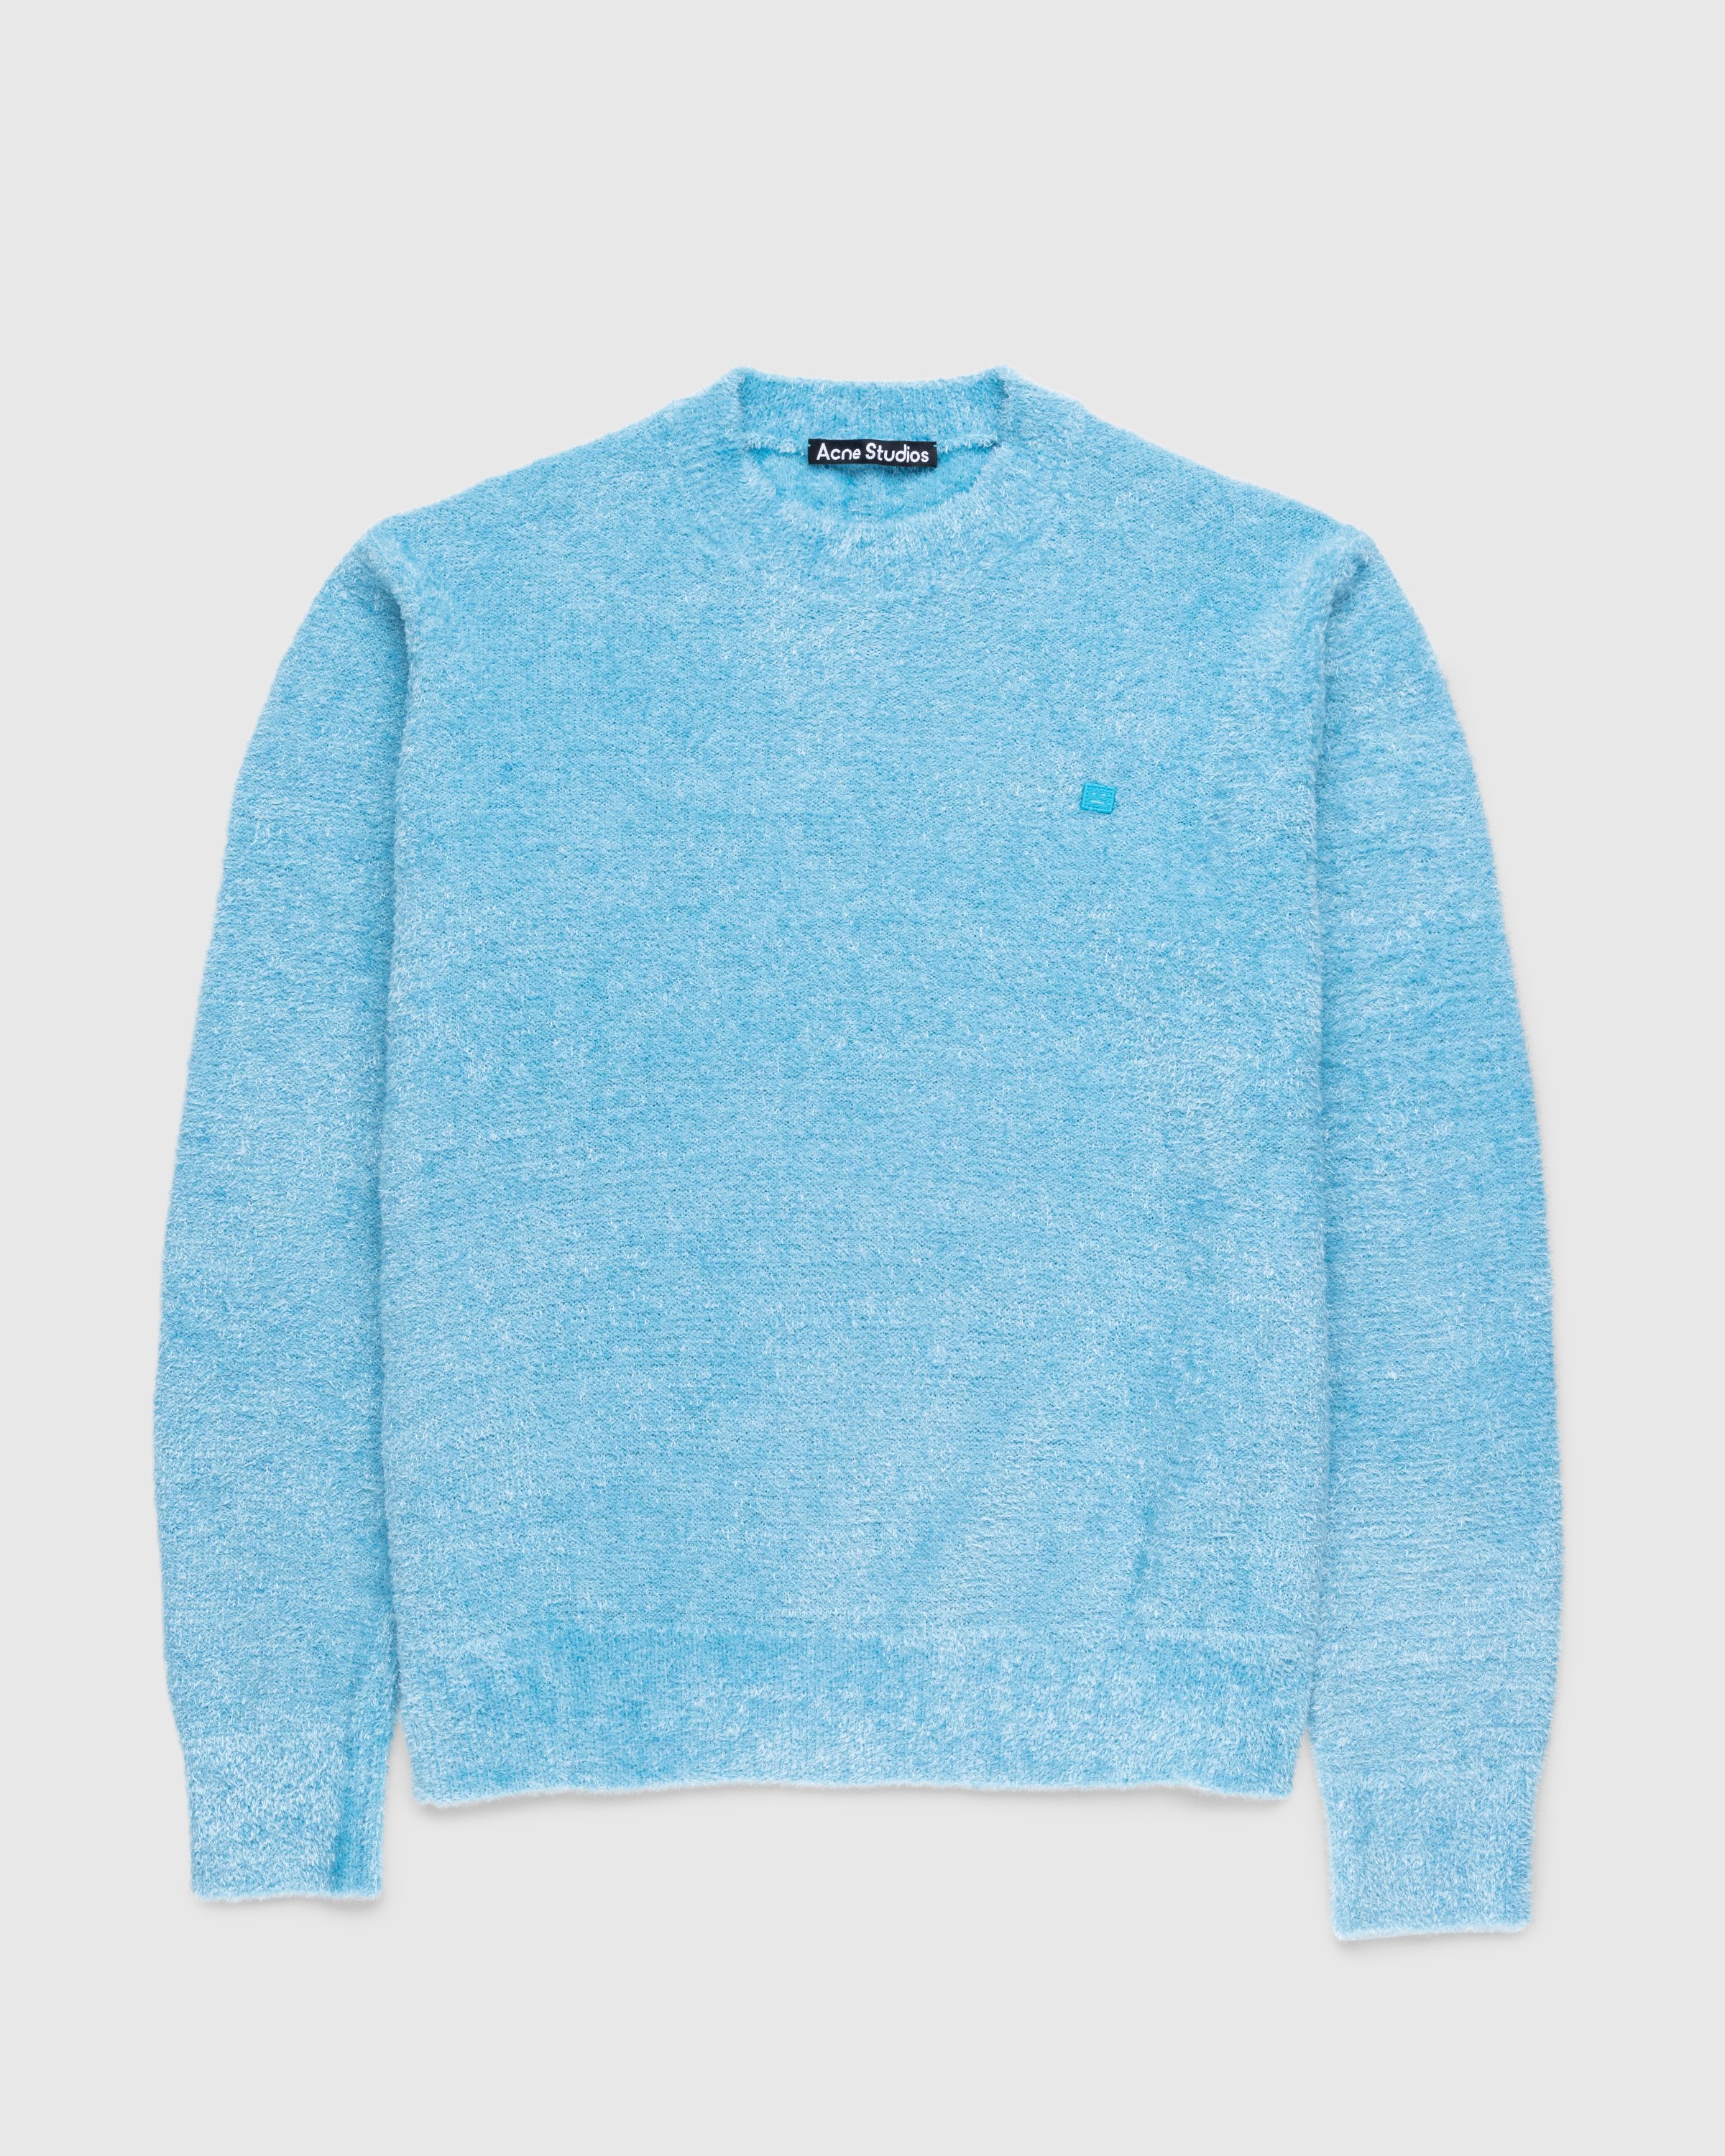 Acne Studios - Textured Sweater Teal Blue - Clothing - Blue - Image 1